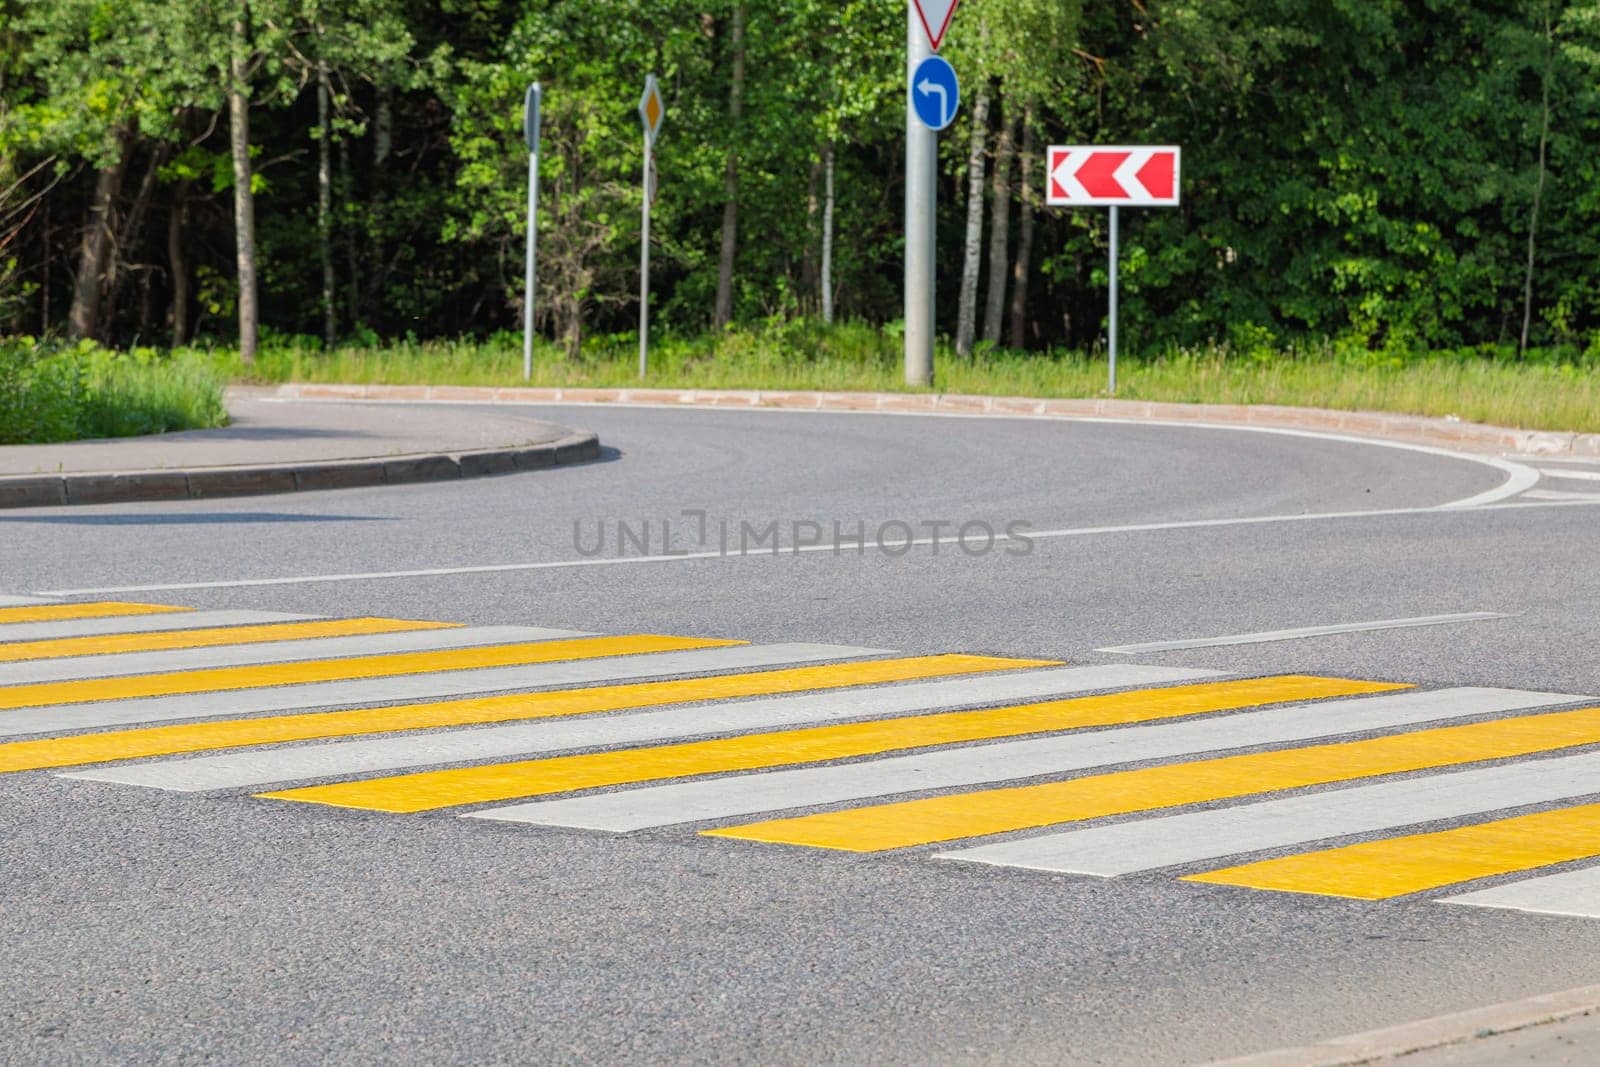 Pedestrian crossing with yellow and white stripes. High quality photo